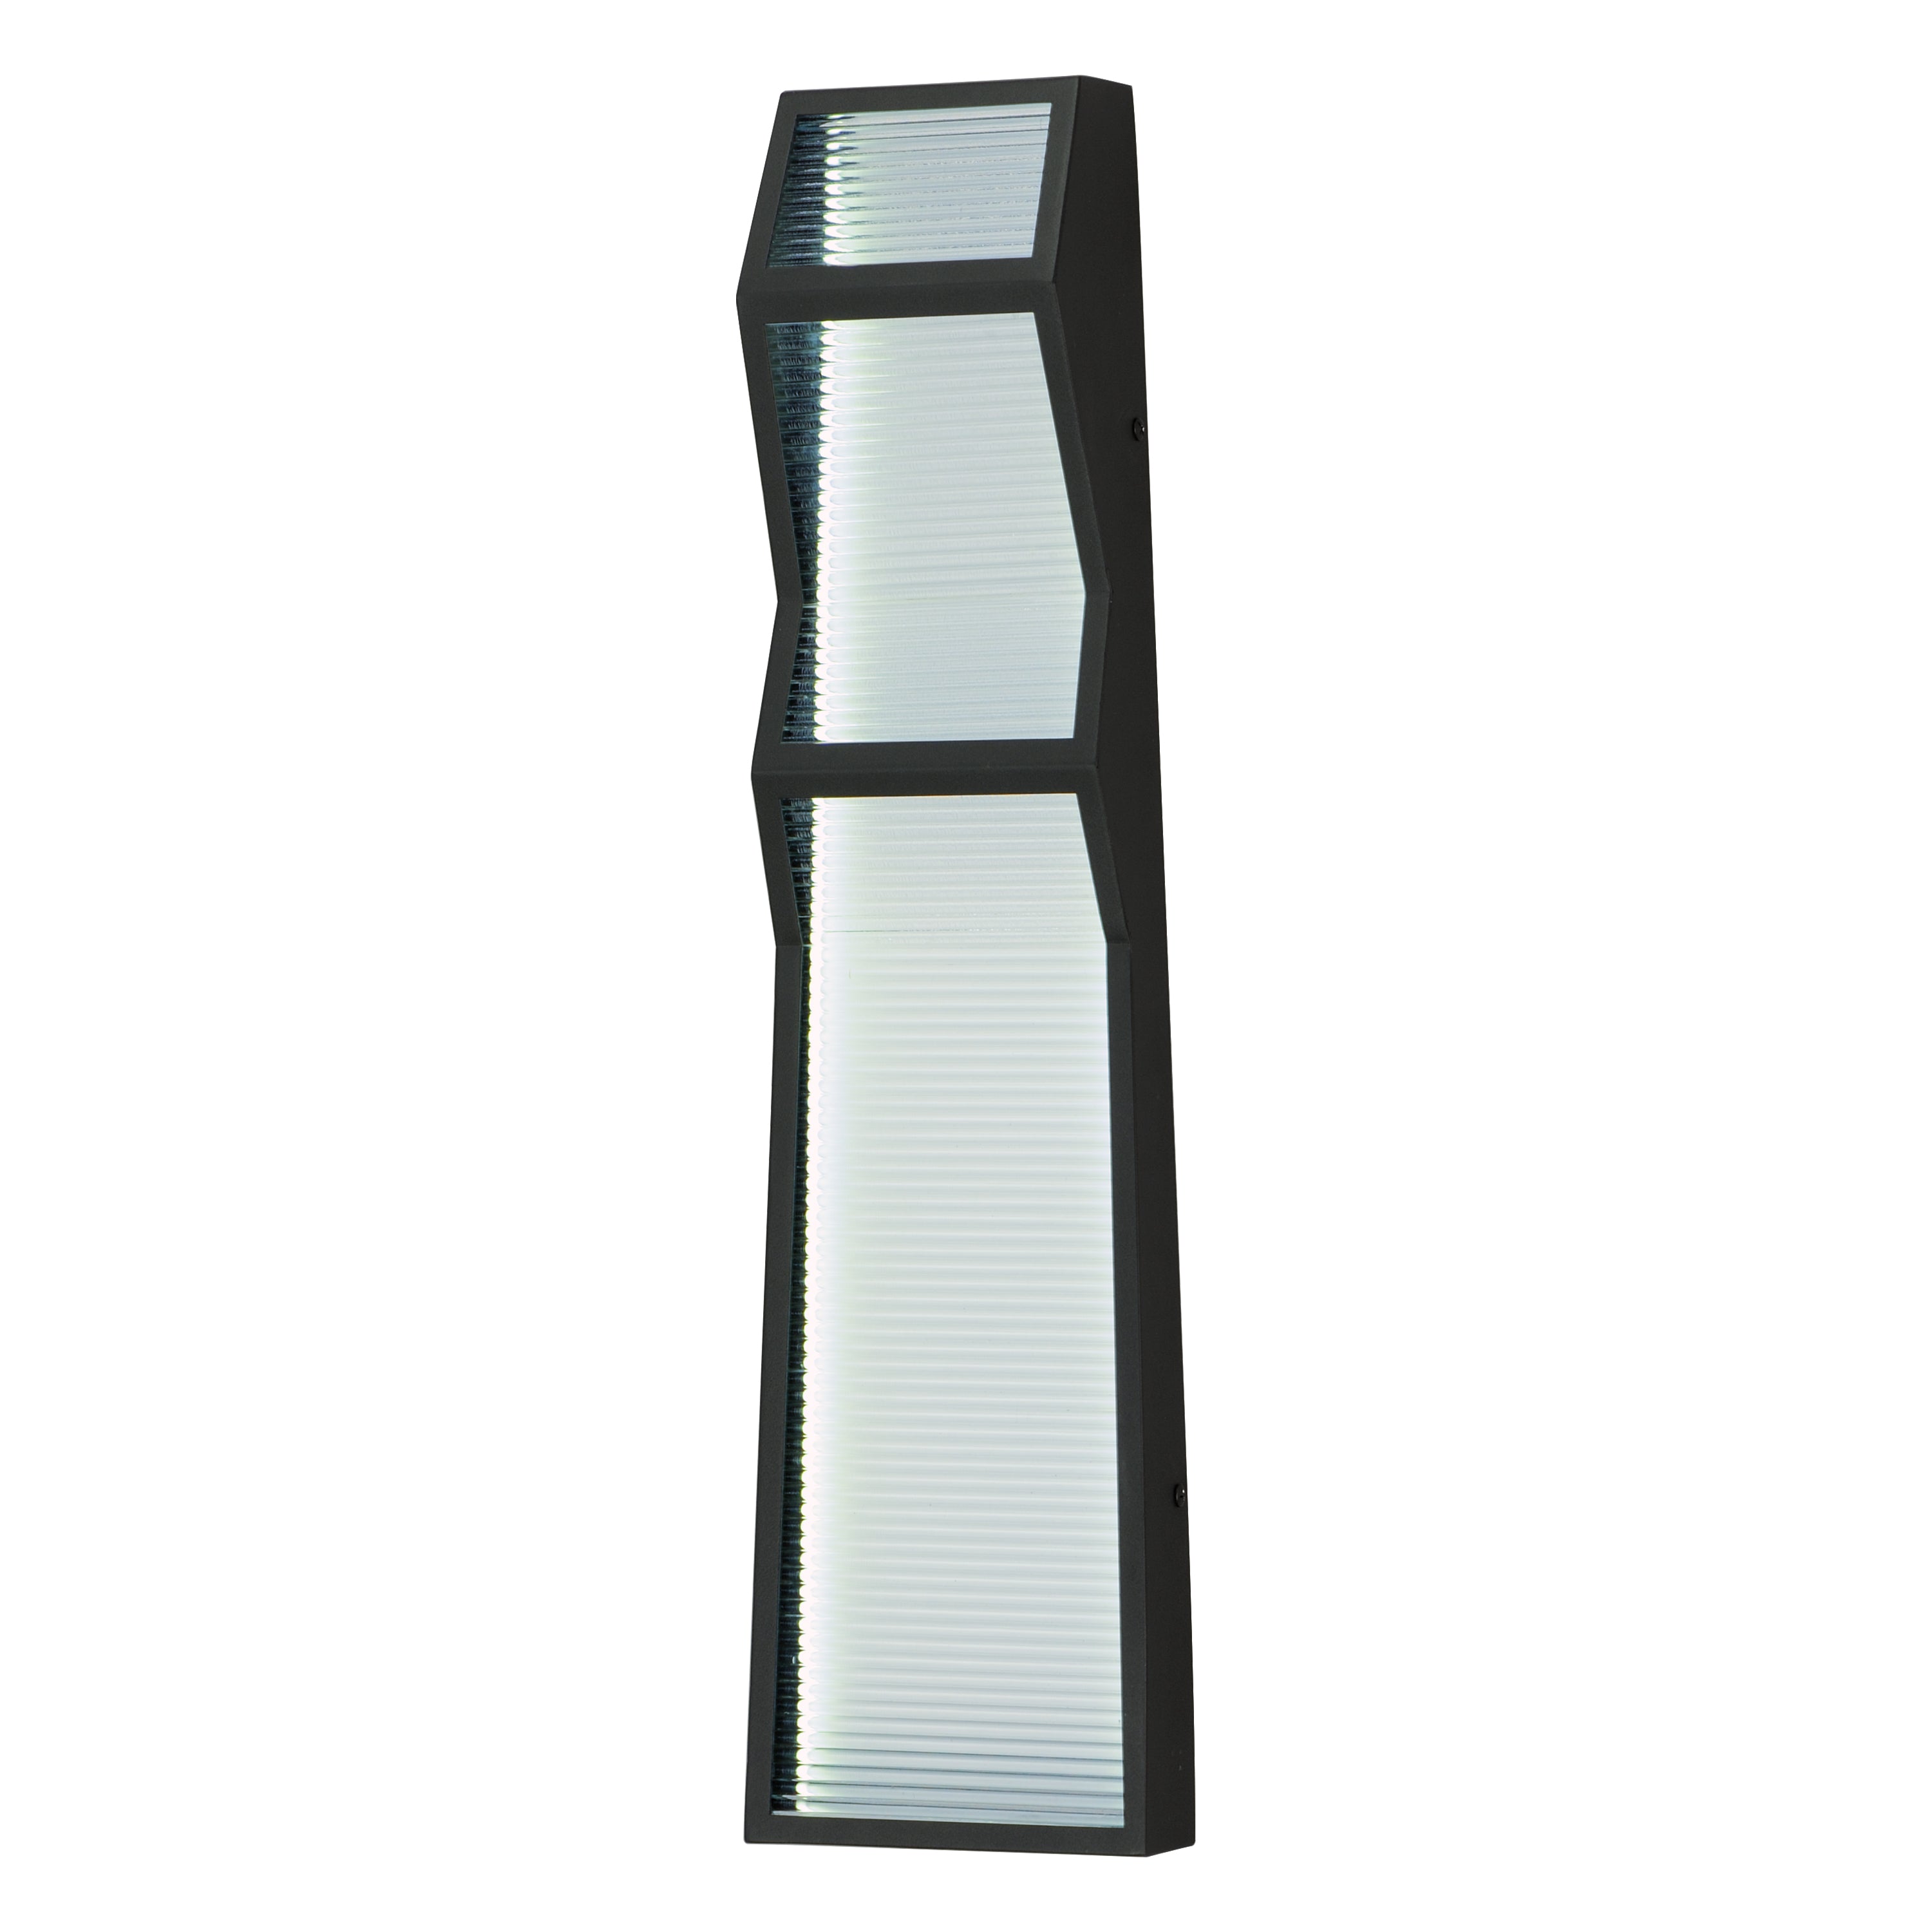 Totem-Outdoor Wall Mount Outdoor l Wall ET2 x6x24 Black 